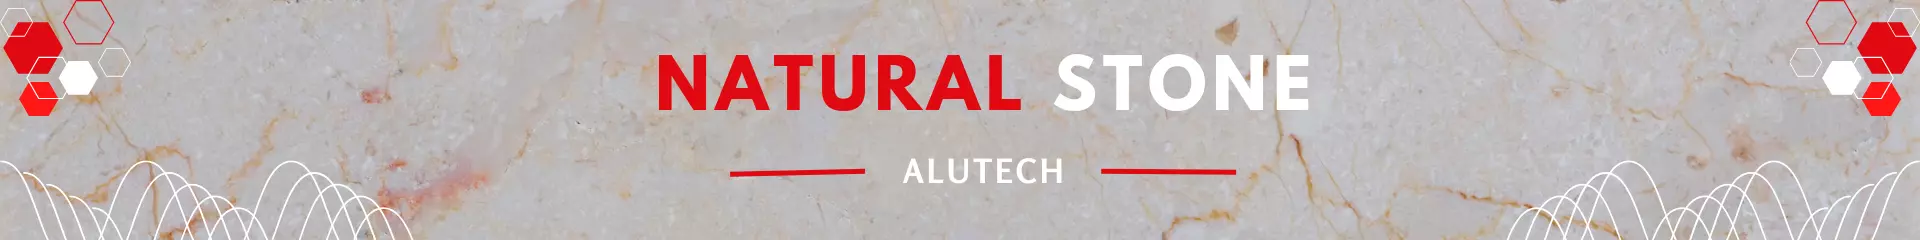 Alutech Natural Stone Banner Image